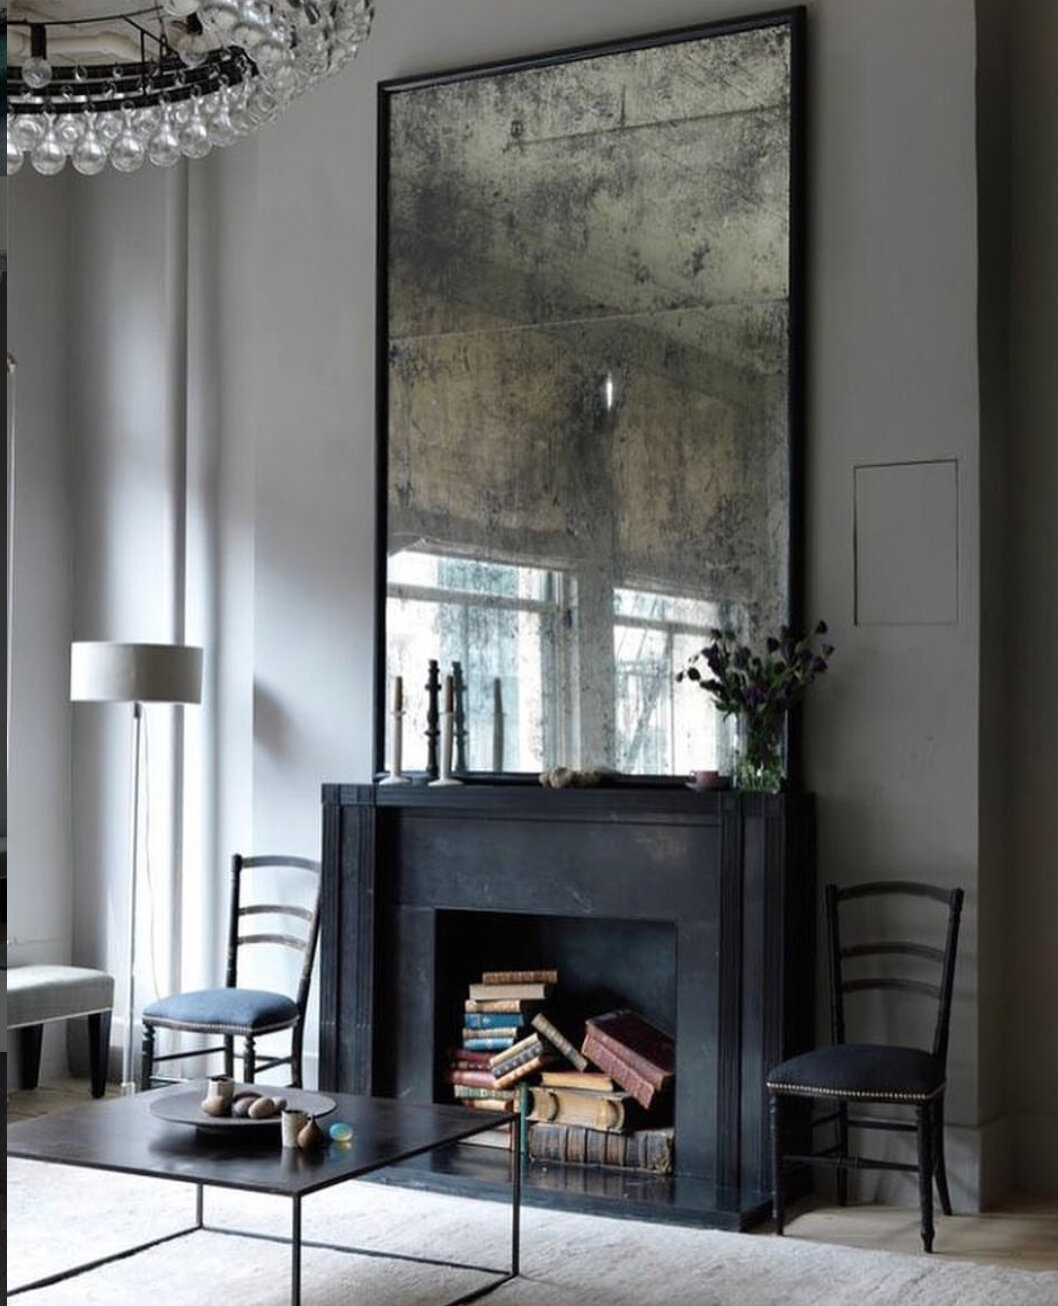 20 Fireplace Decor Ideas That'll Light Up Your Living Room.​​​​​​​​​Even non-working fireplaces can cash in on these design tricks. Read our post for the scoop, link in bio.

📷 @ rockettstgeorge 

#gatheraus #mirror #interior #interiordesign #archit